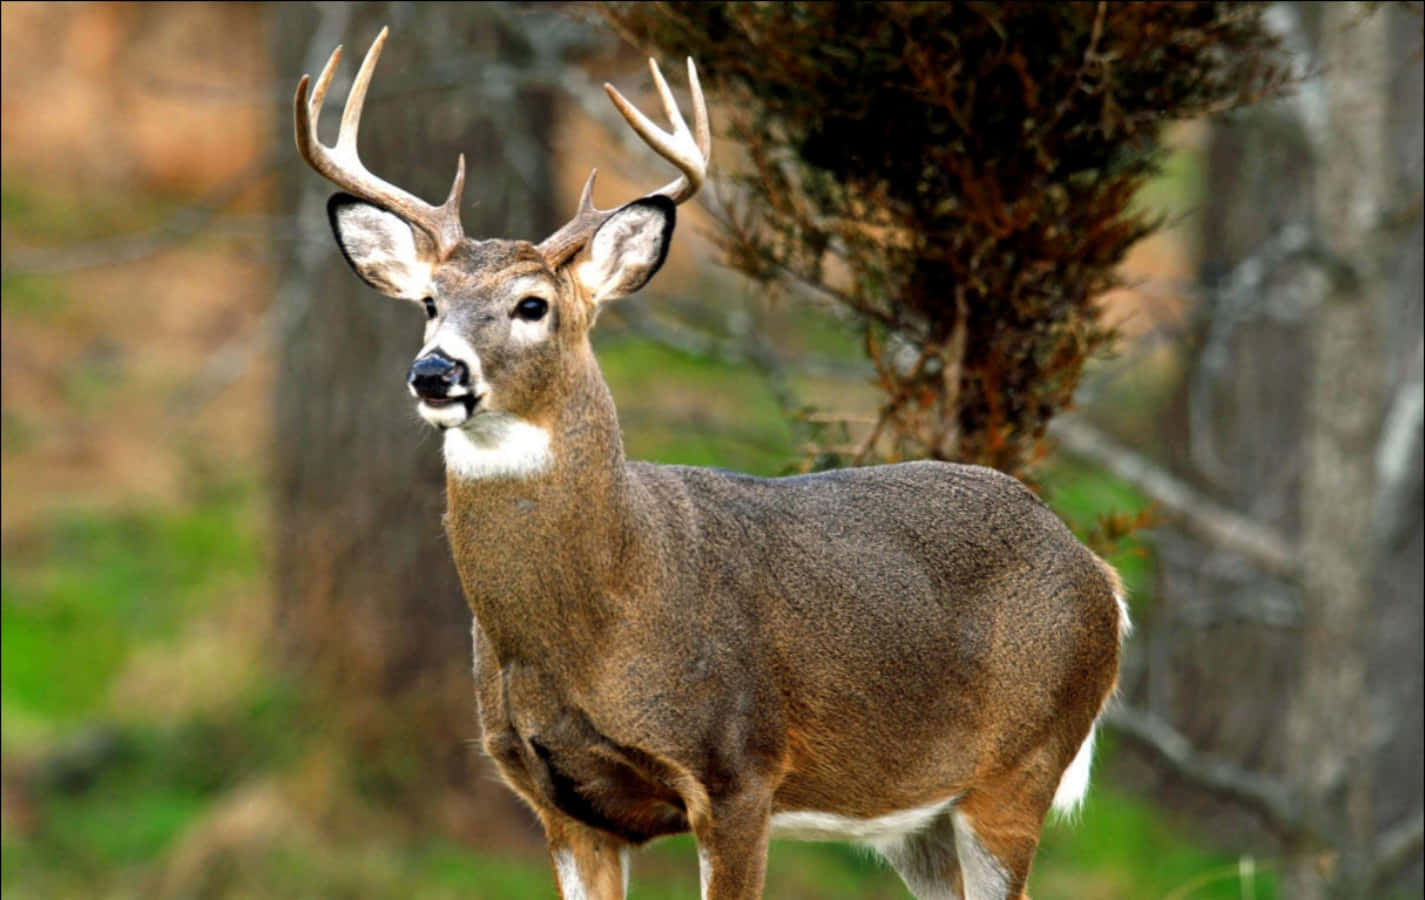 A white-tailed deer in its natural woodland habitat